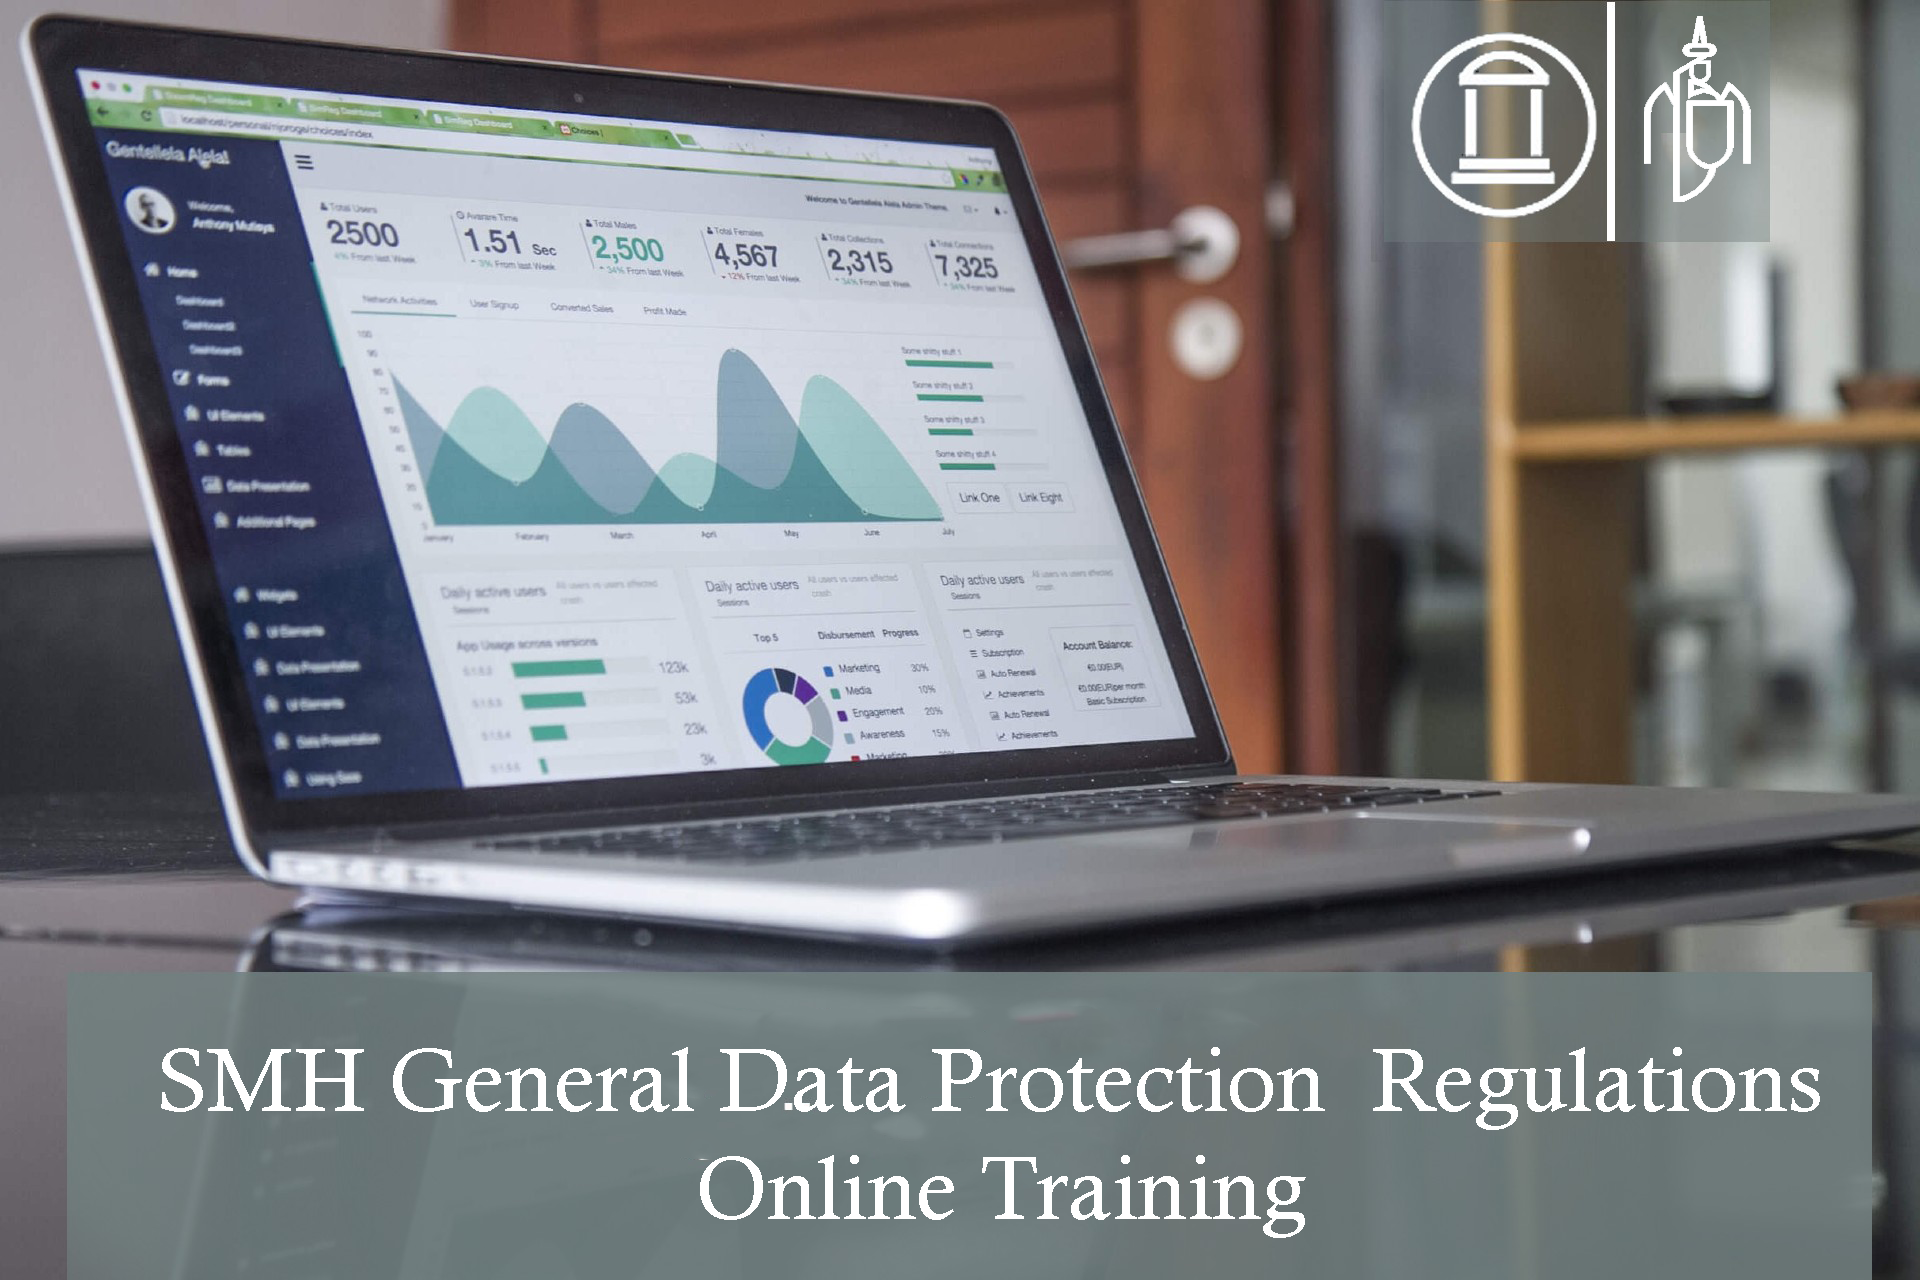 SMH General Data Protection Regulations OO Online Training  - Essential